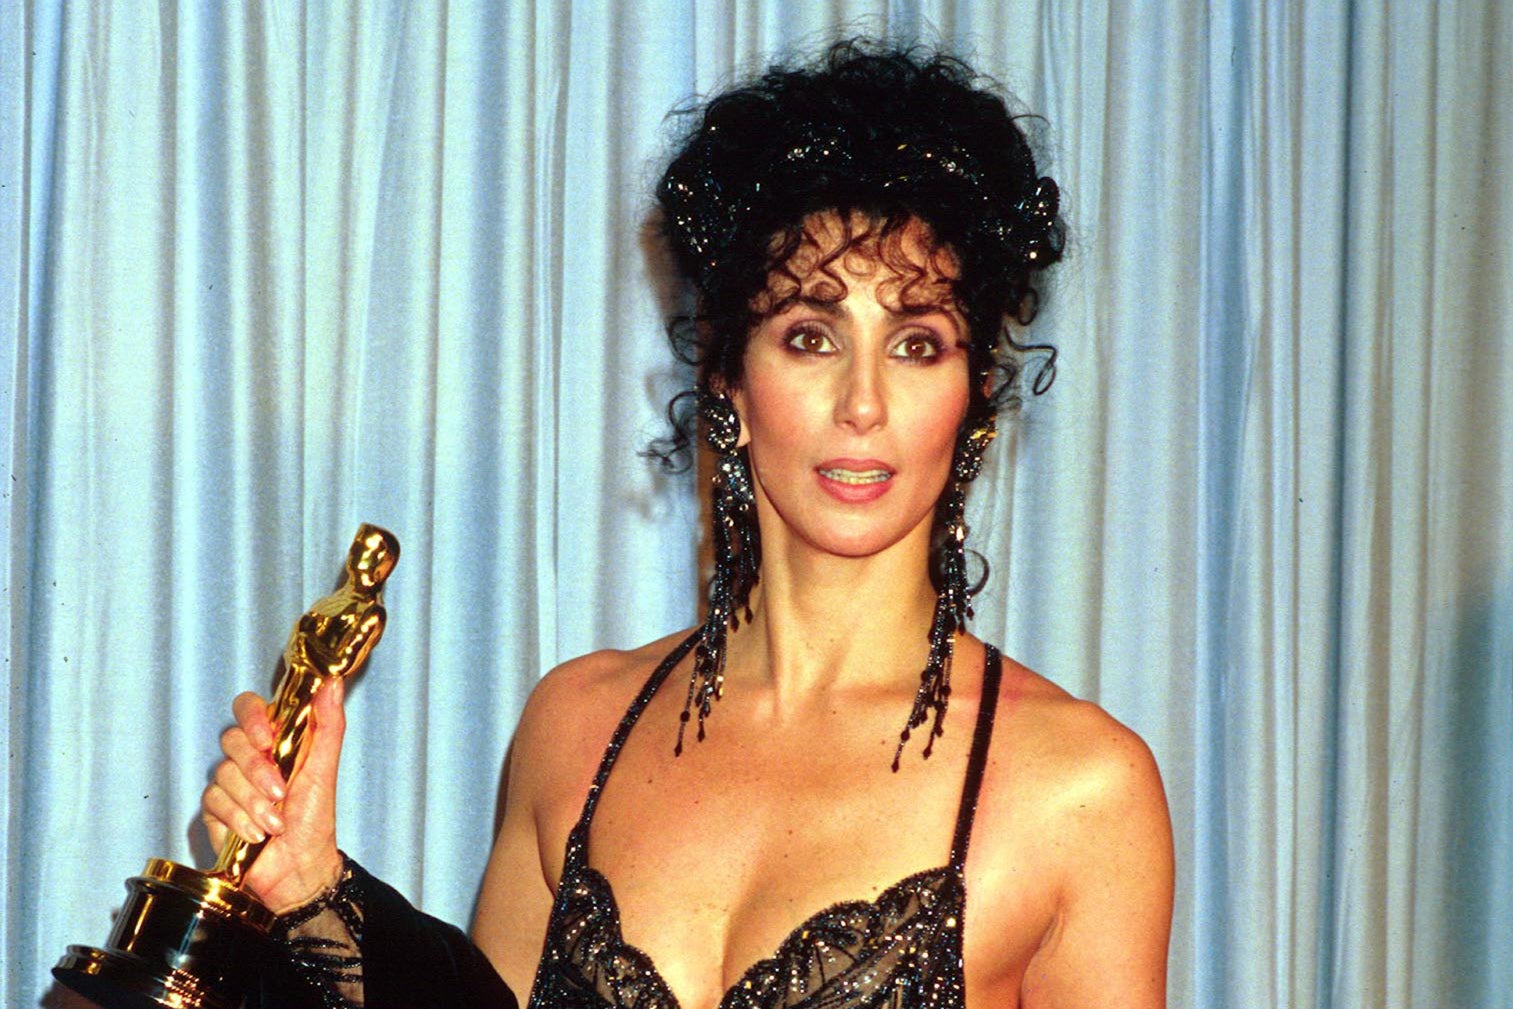 cher, cher determination: inside the skill, scandal and survival of pop’s most immortal star